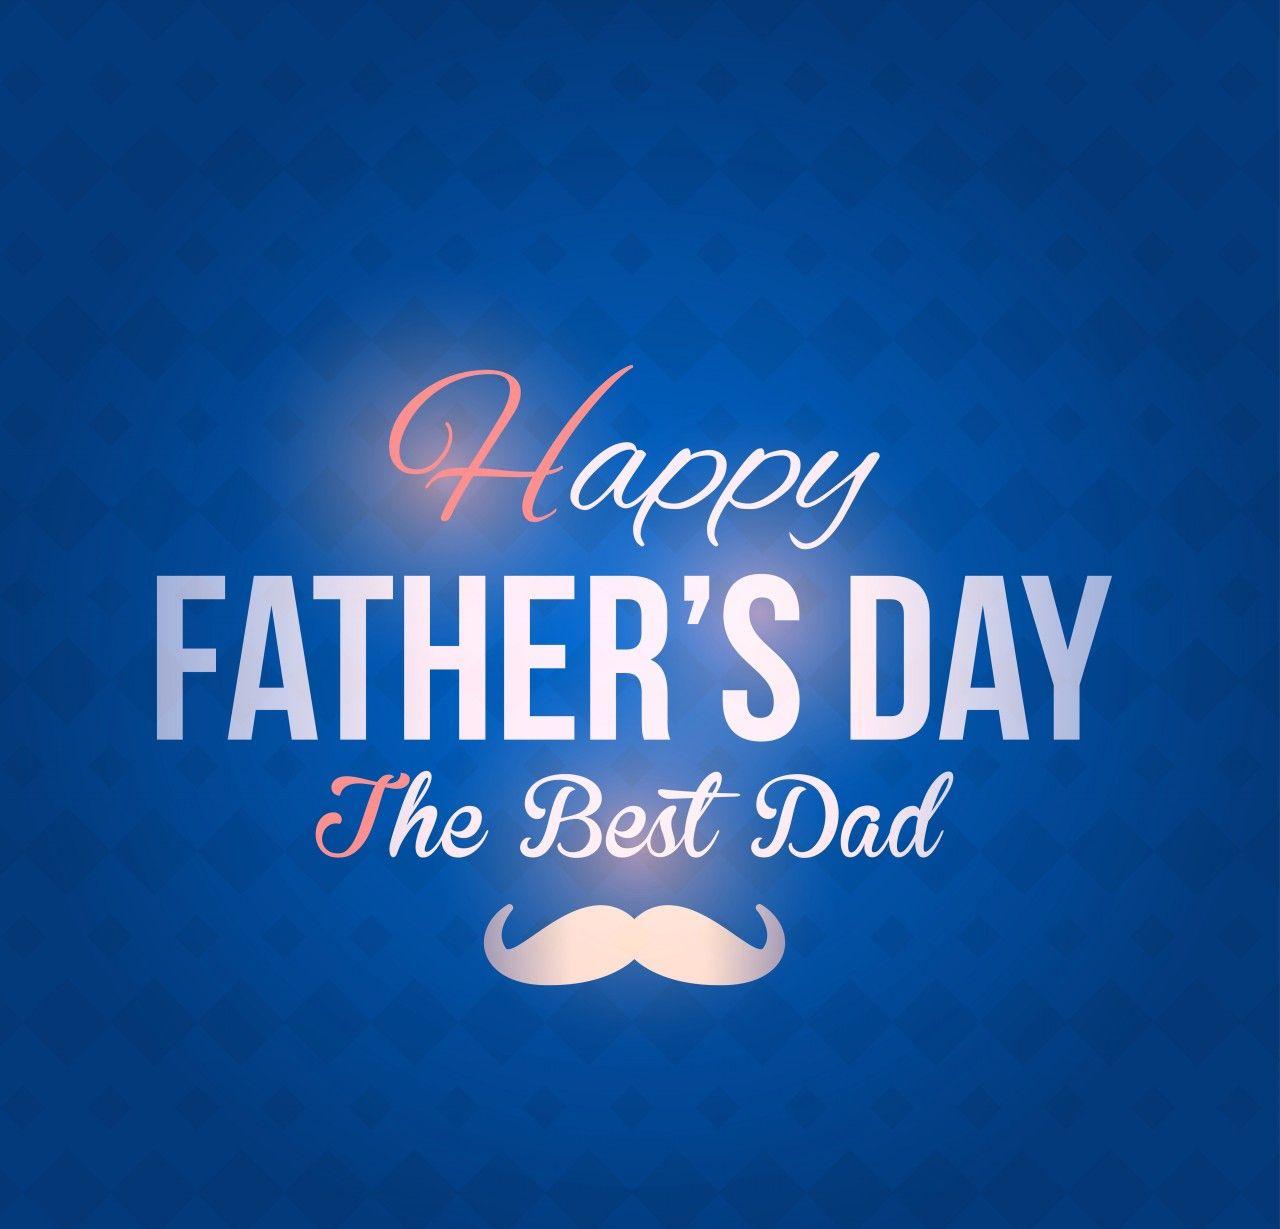 Father's Day 2017 Wallpaper, get awesome wallpaper for Fathers